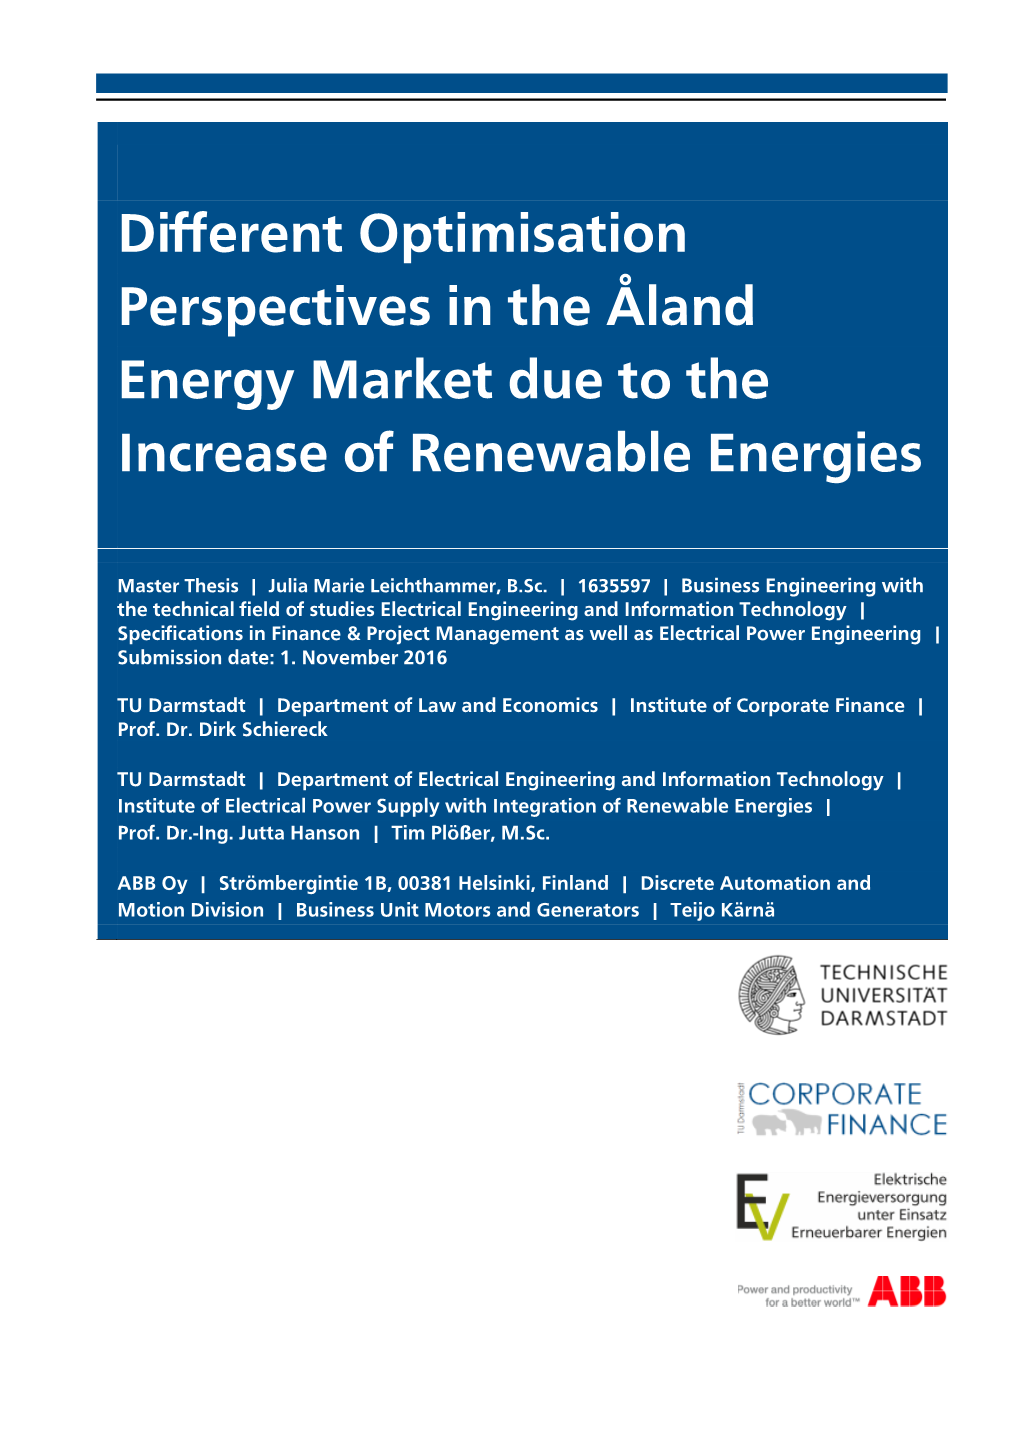 Optimisation Perspectives in the Åland Energy Market Due to the Increase of Renewable Energies